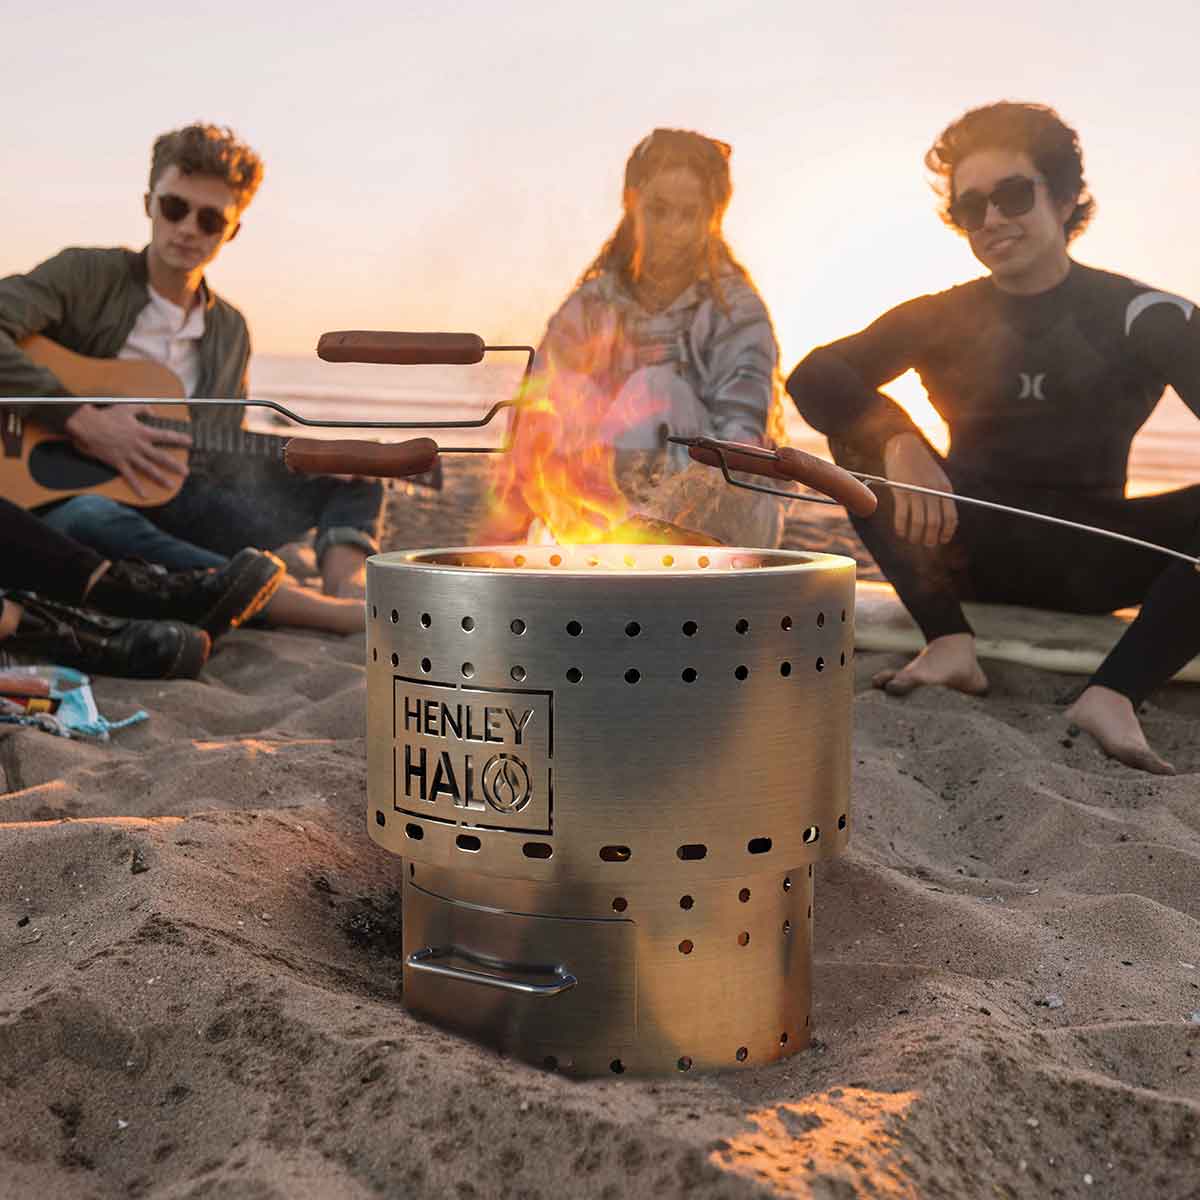 Lifestyle shot of people on the beach with the halo firepit